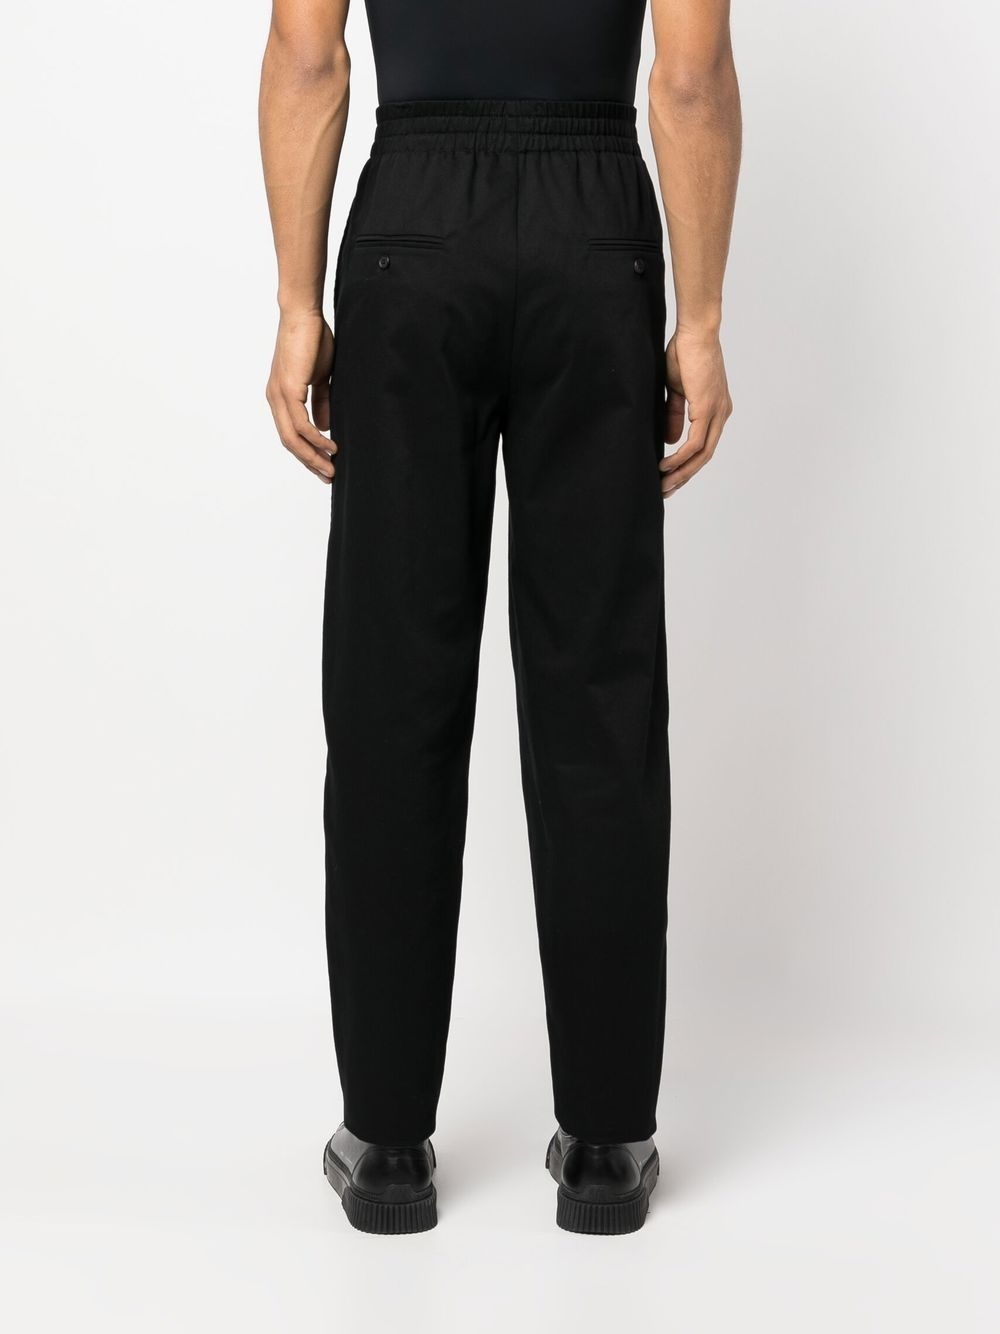 Cotton trousers - 2